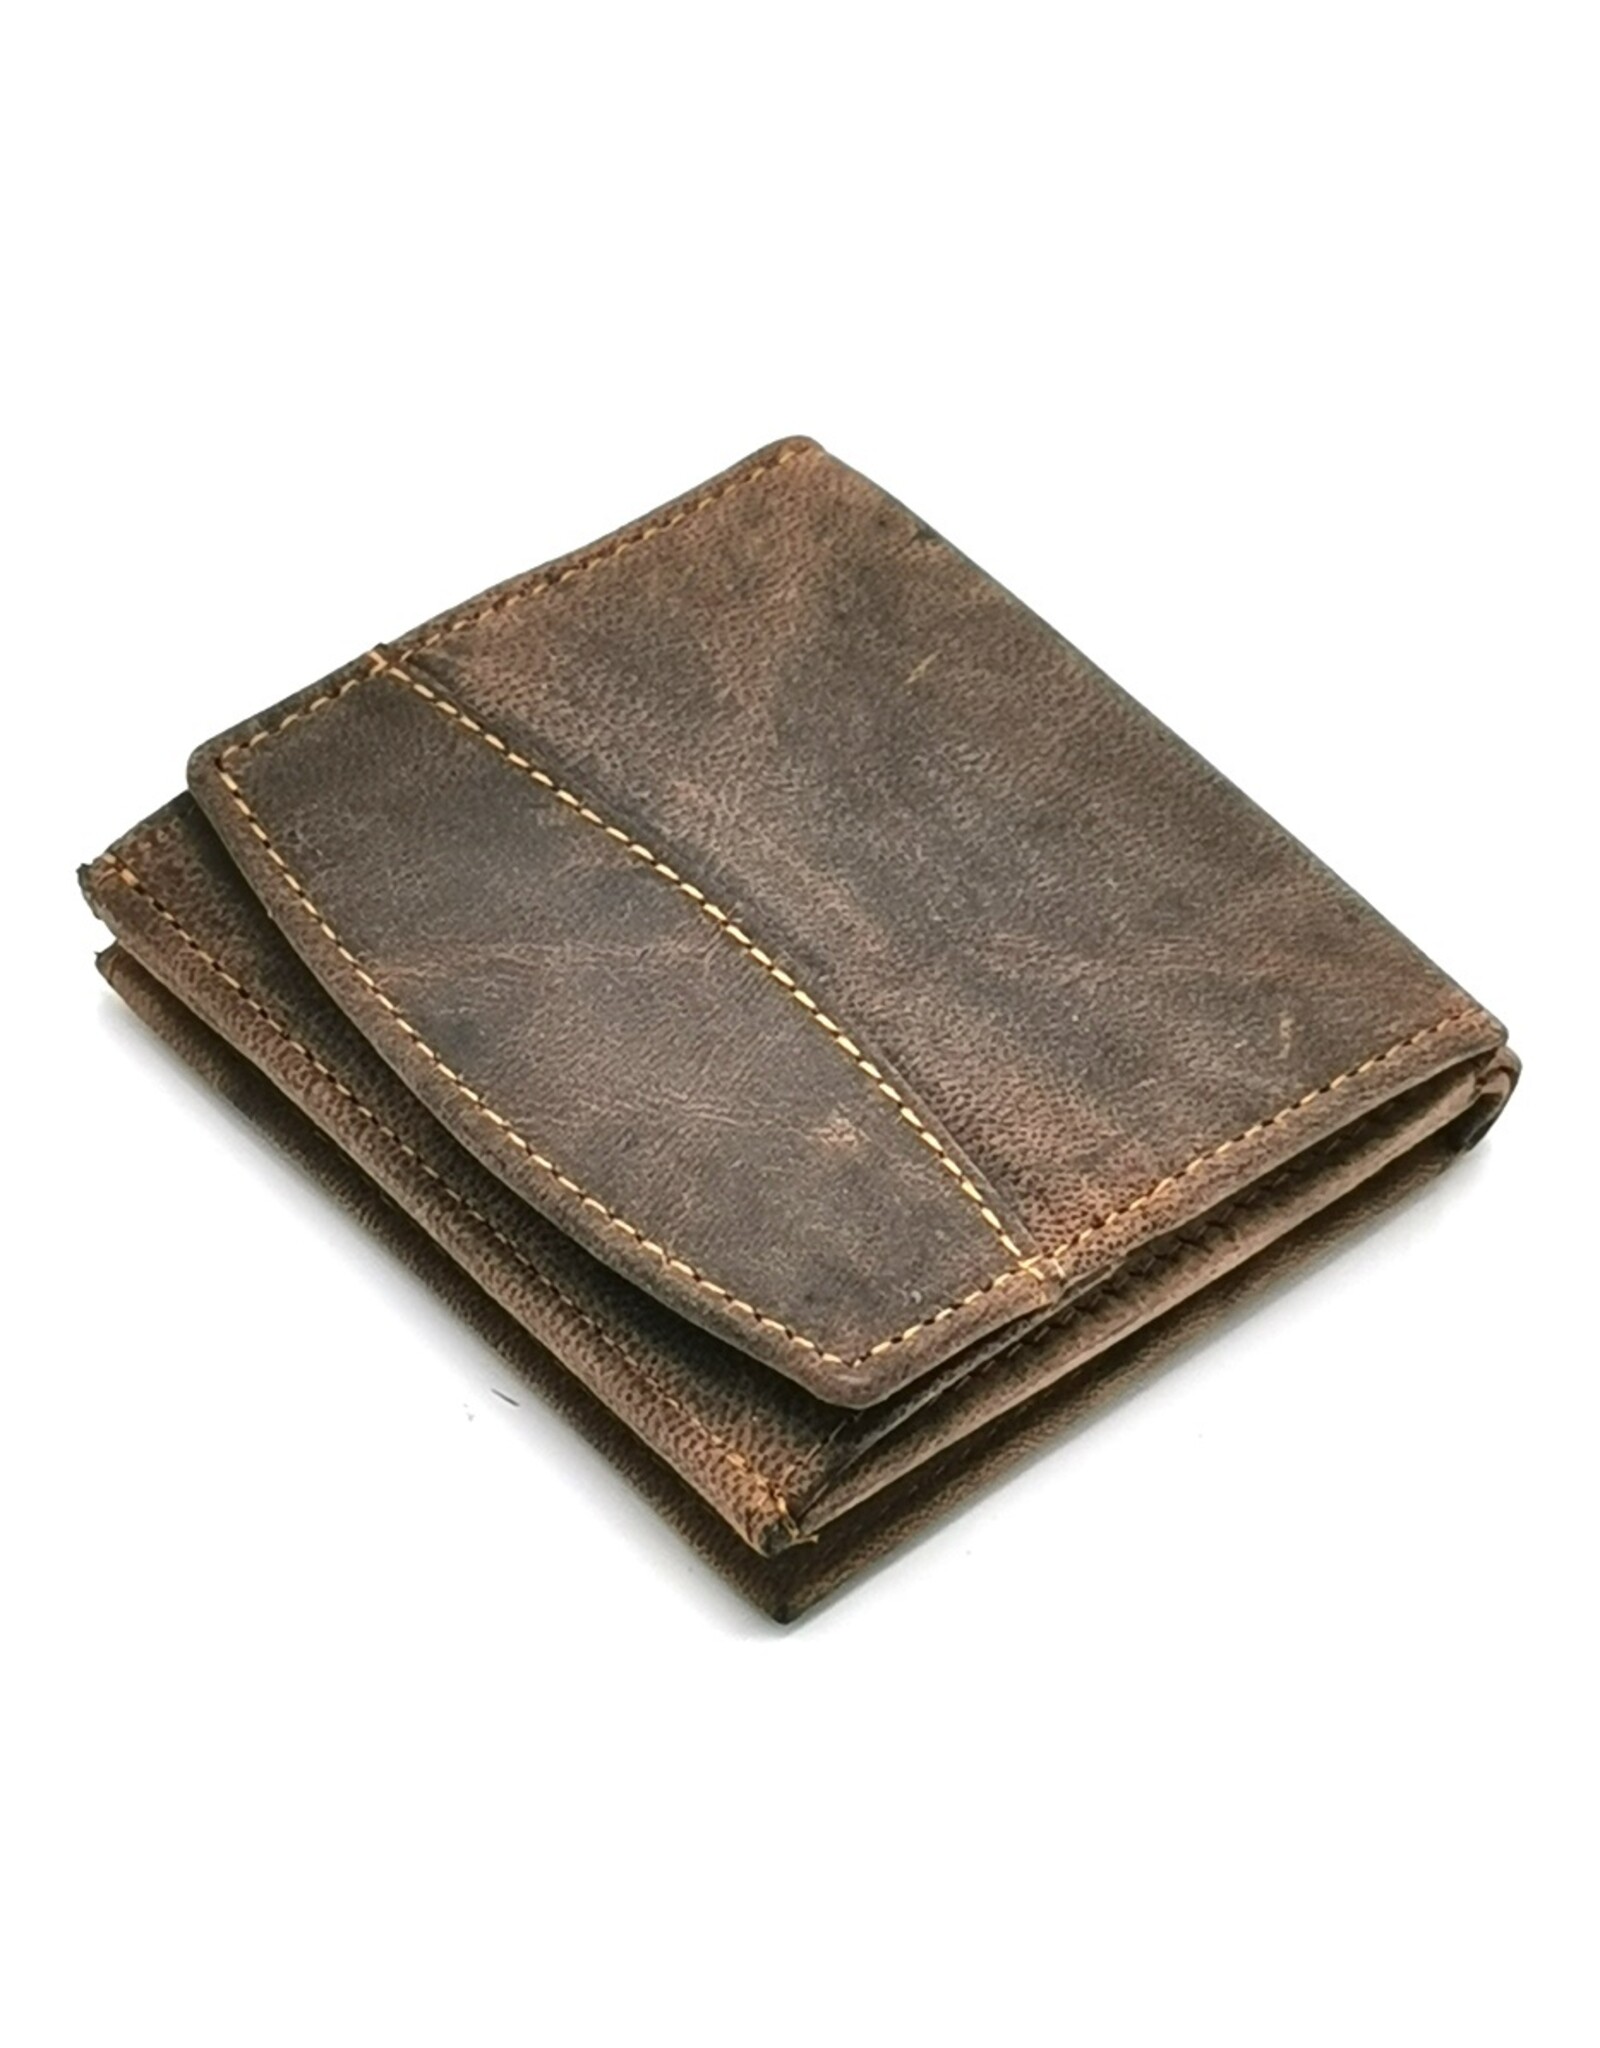 Hunters Leather Wallets - Leather wallet with large coin compartment and RFID